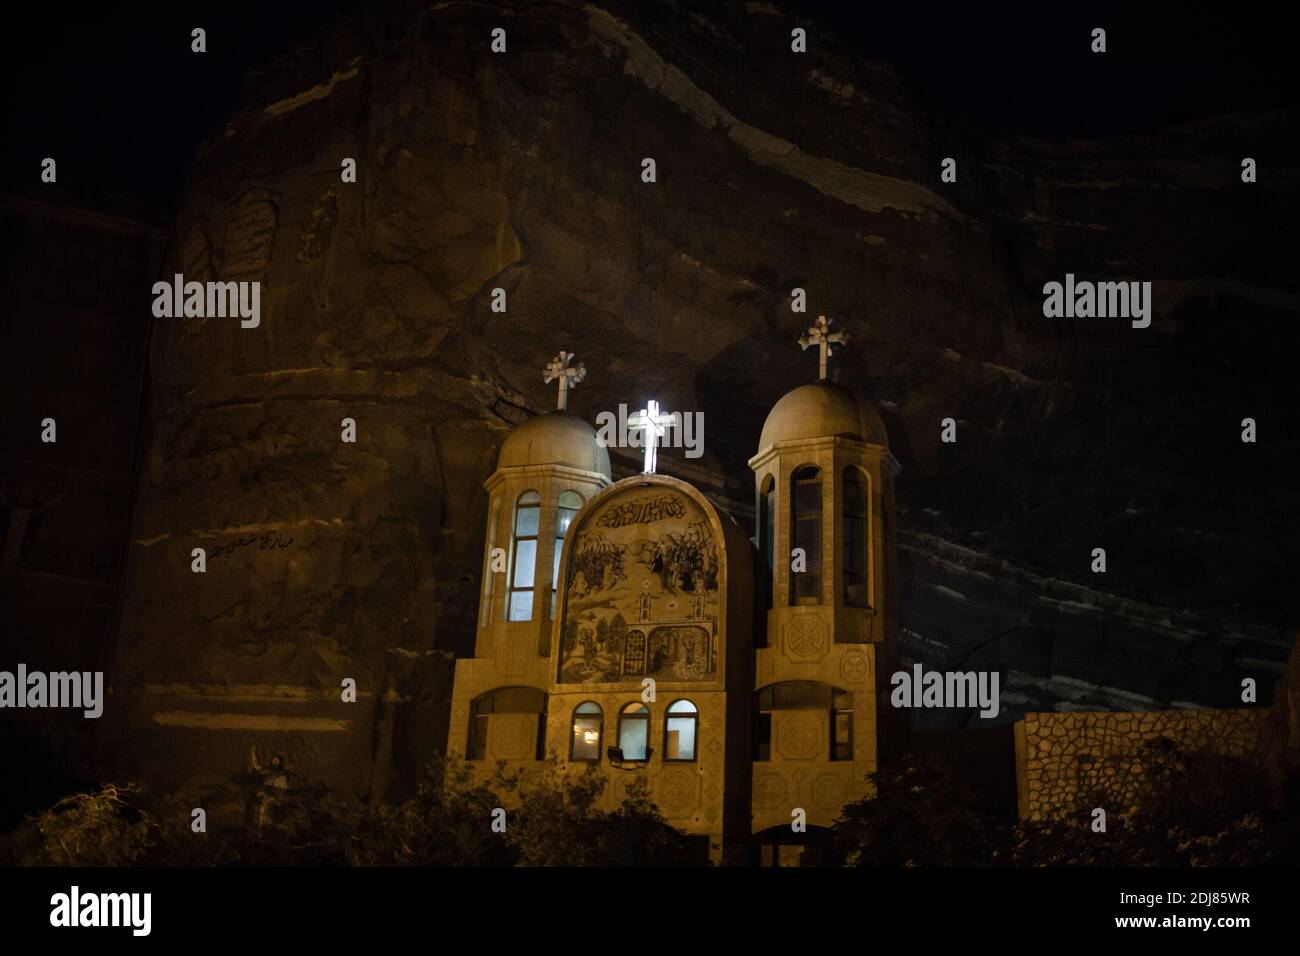 NO WEB/NO APPS - St. Sama'an Cathedral (Saint Simon church) in the Mokattam village nicknames ''Garbage City'', in Cairo, Egypt, on August 19, 2016. The Monastery of Saint Simon (Saint Samaan), also known as the Cave Church, is located in the Mokattam mountain in southeastern Cairo. Hundreds of Muslims go every week to the church of Sama'an (the largest Christian church in the Middle East), for a seance of exorcism. Photo by Etienne Bouy/ABACAPRESS.COM Stock Photo